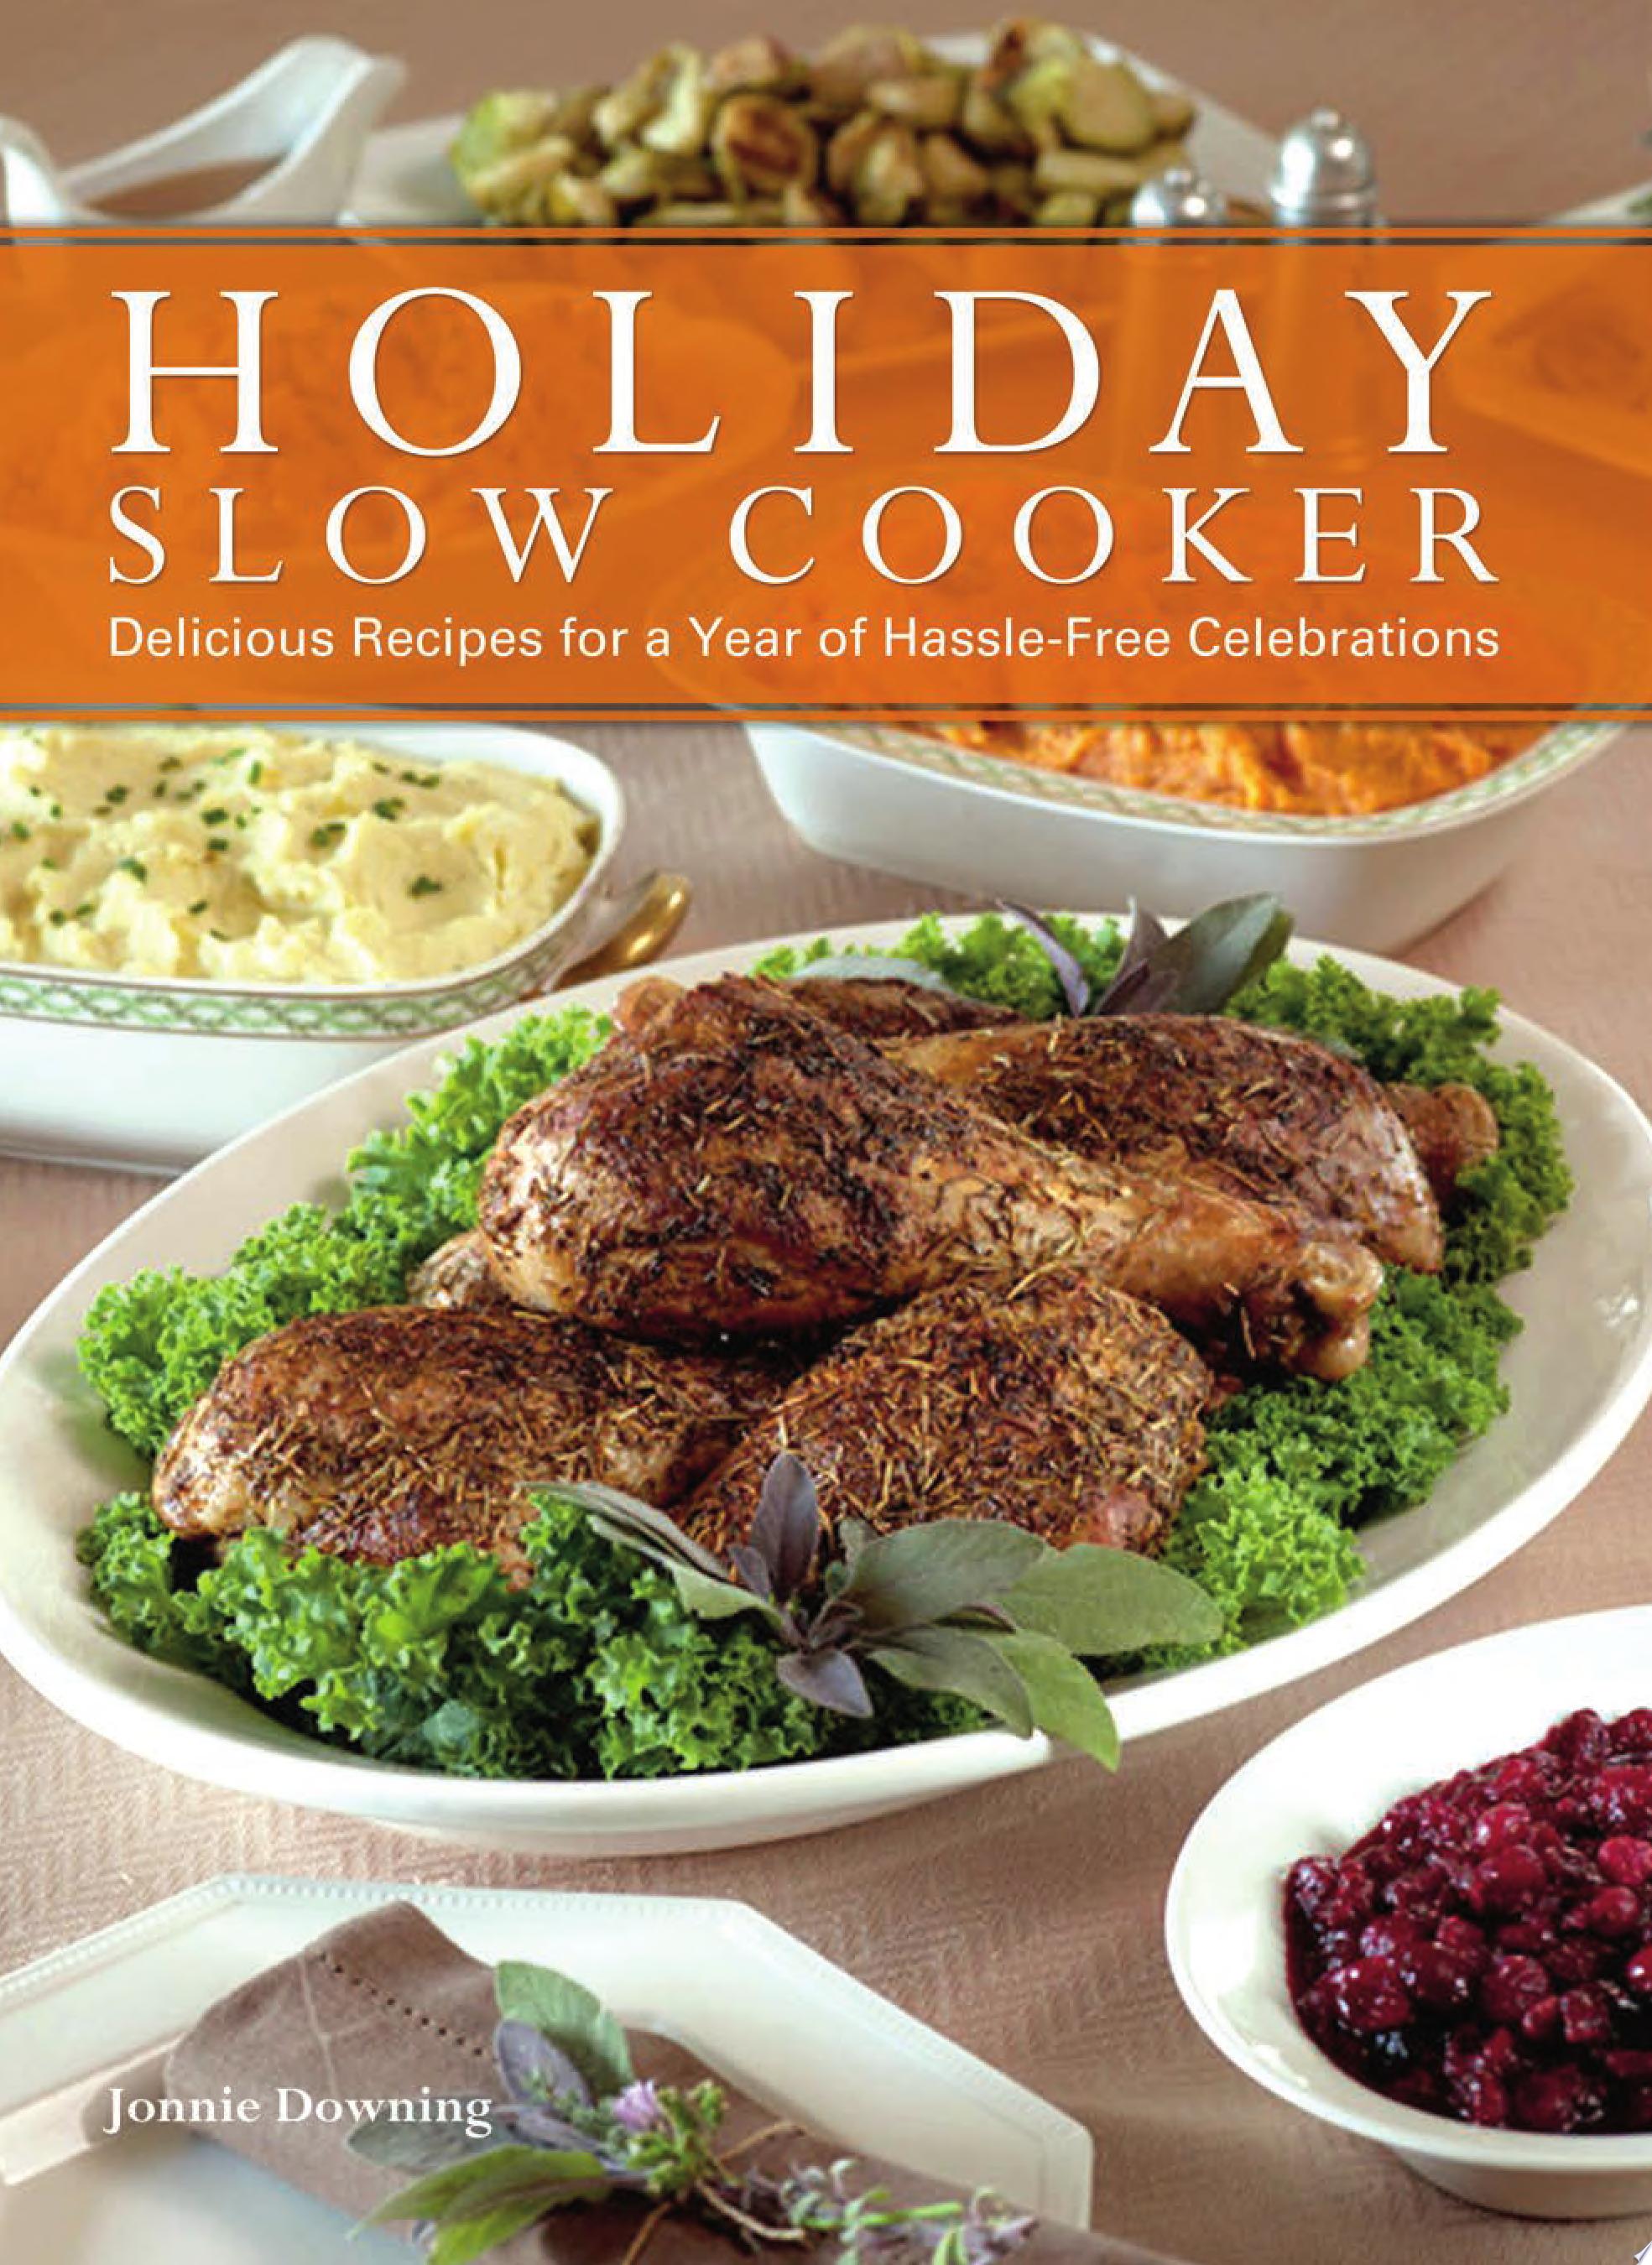 Image for "Holiday Slow Cooker"